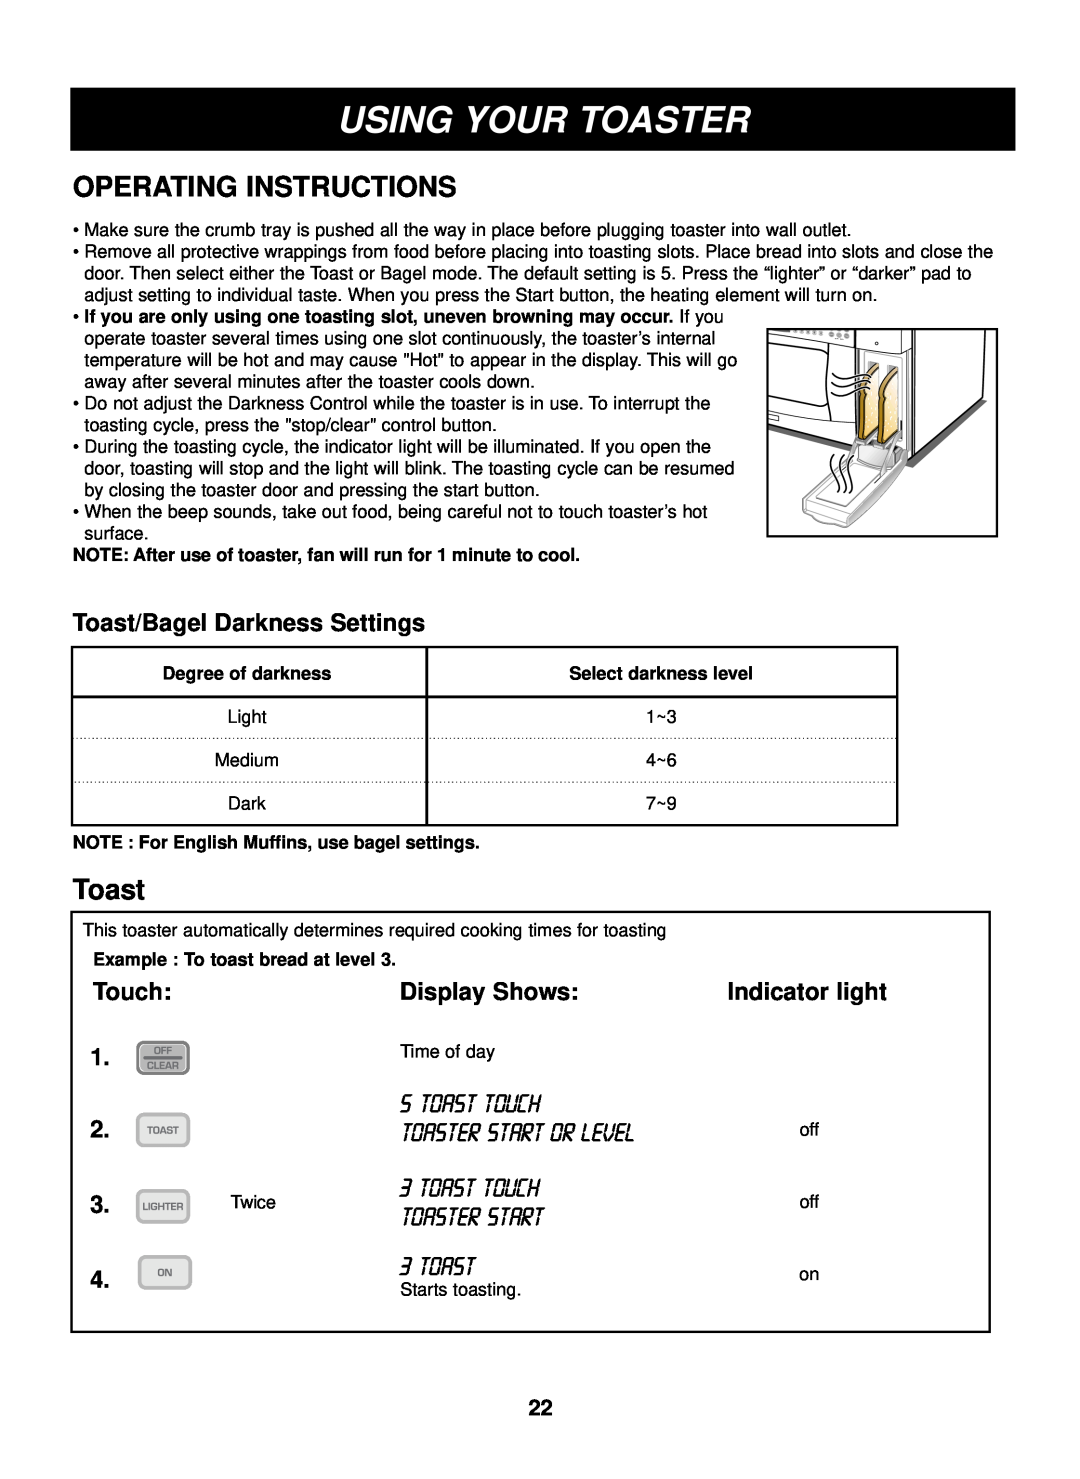 LG Electronics LTRM1240ST Operating Instructions, Toast/Bagel Darkness Settings, Indicator light, Toast Touch, English 